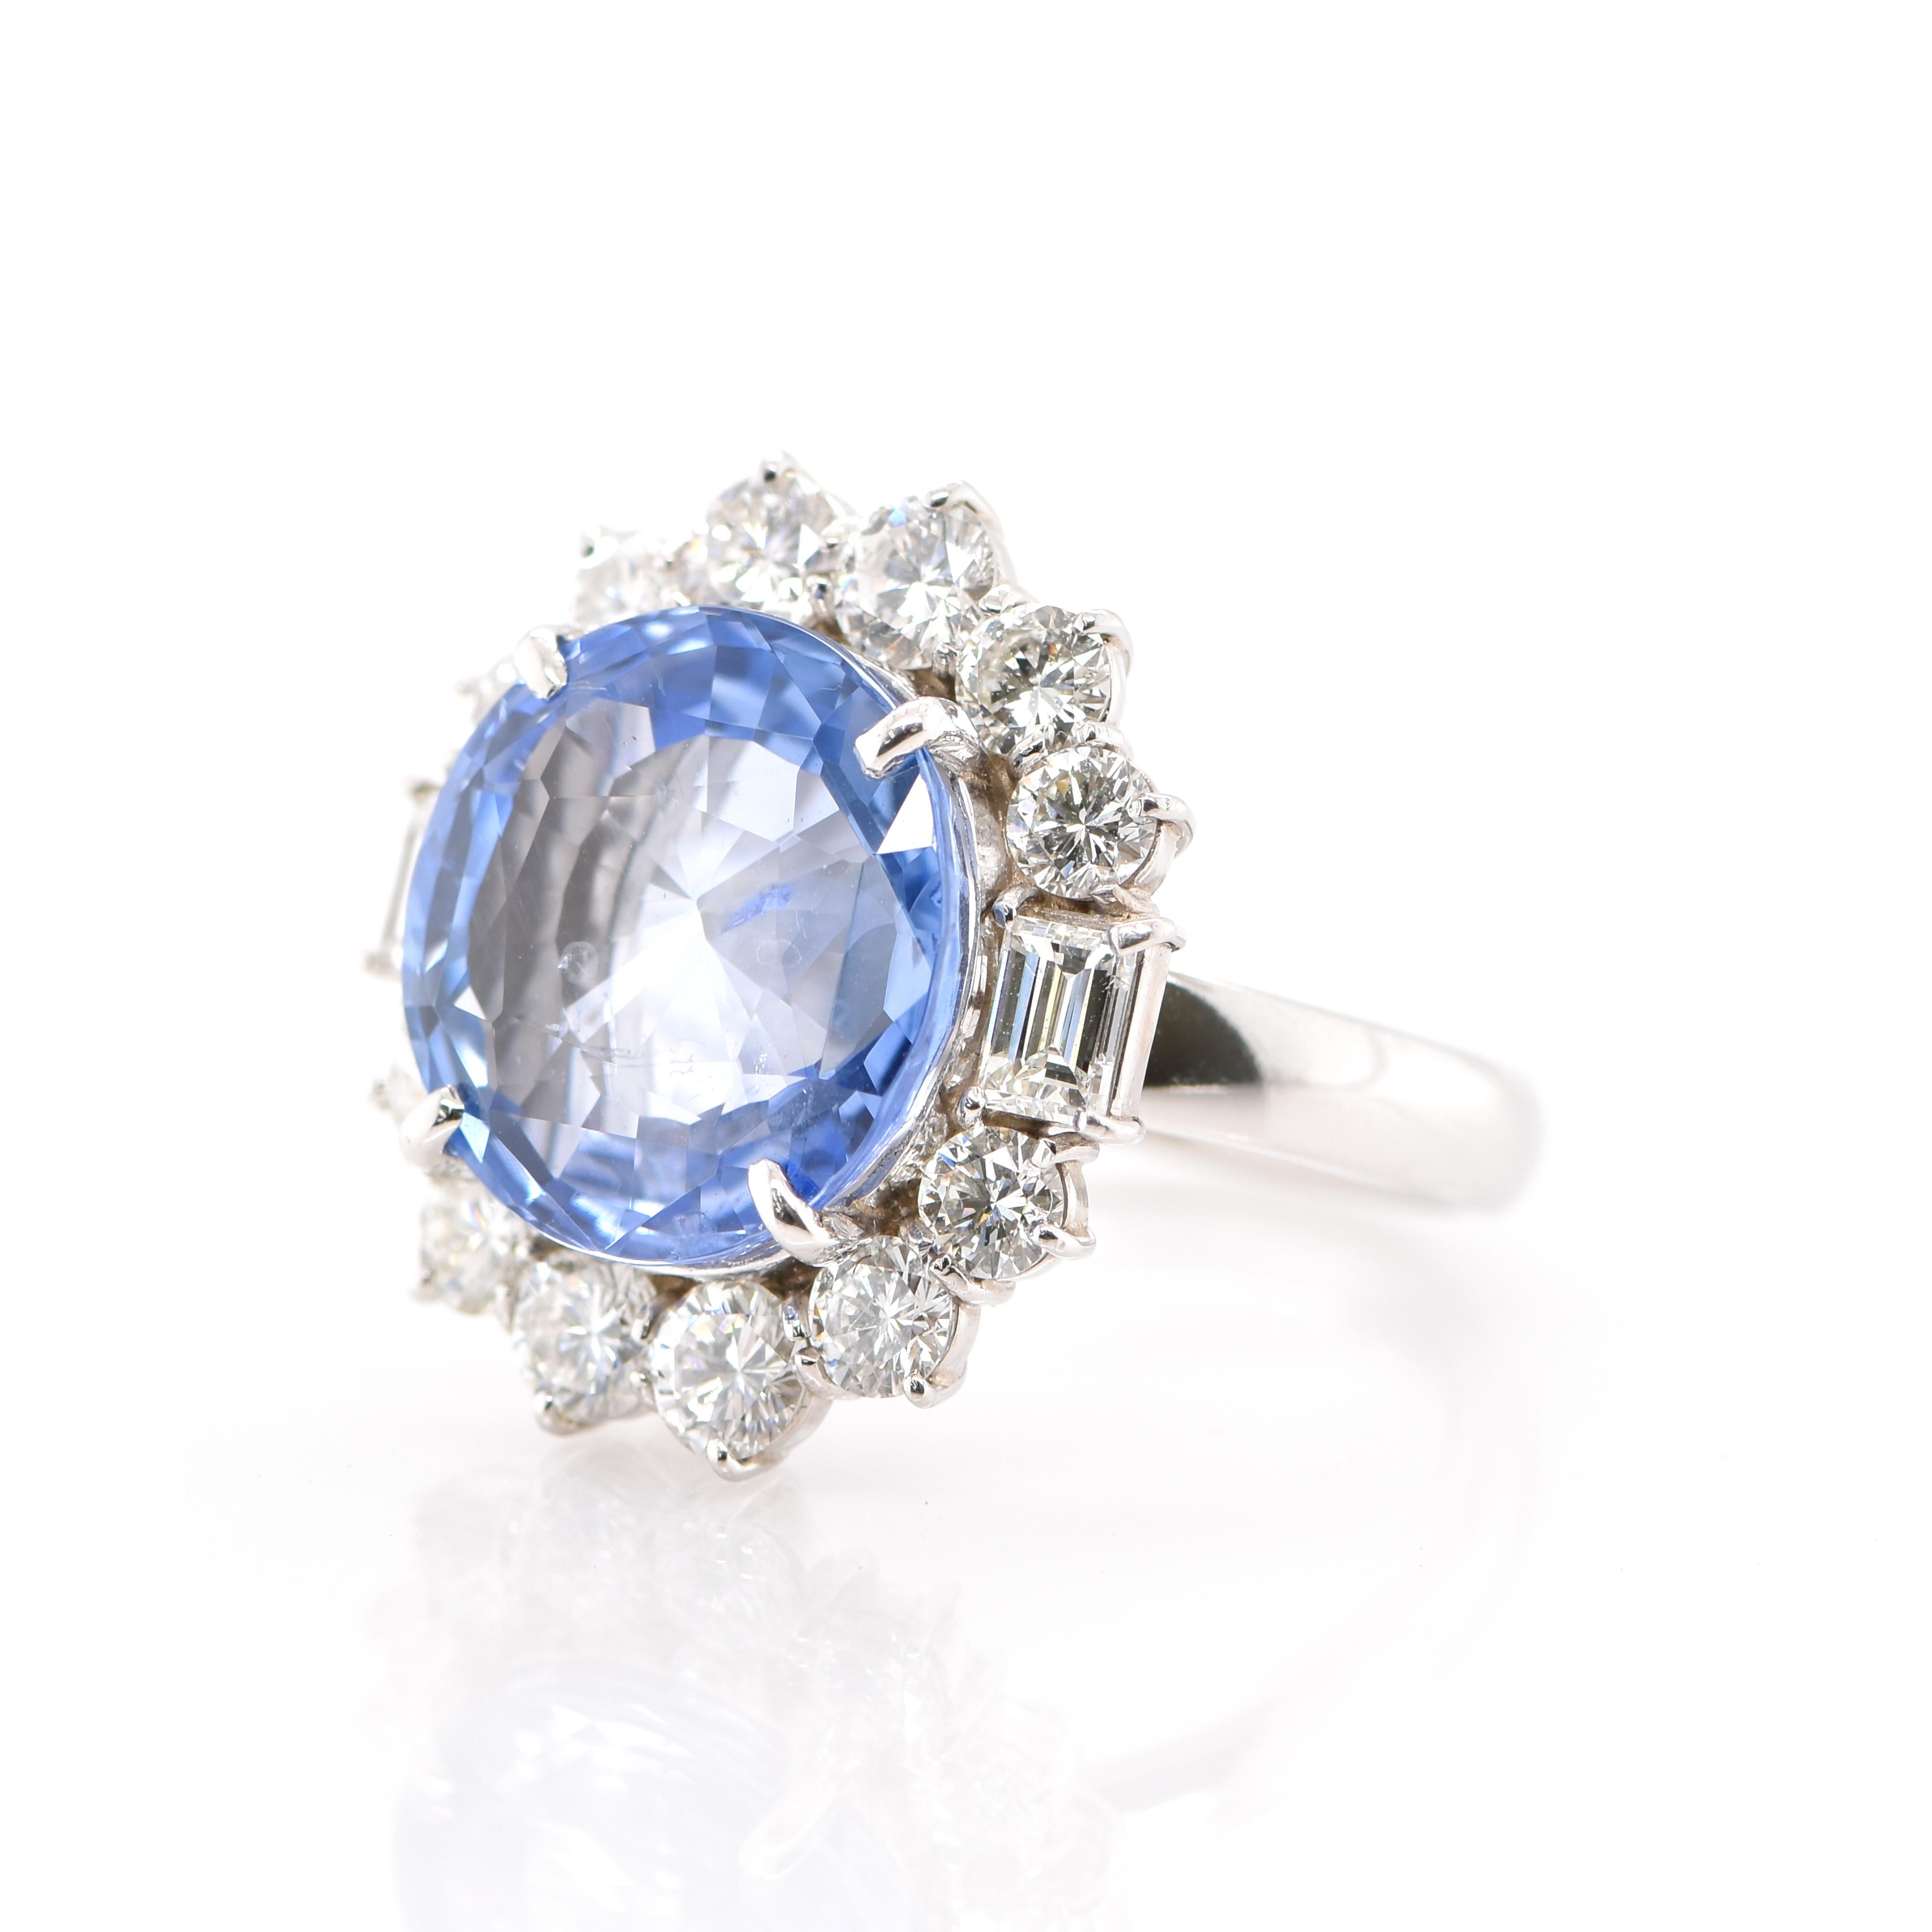 A stunning Halo Cocktail Ring featuring a CGL Certified 10.07 Carat Untreated, Natural Sapphire and 2.28 Carats of Diamond Accents set in Platinum. Sapphires have extraordinary durability - they excel in hardness as well as toughness and durability